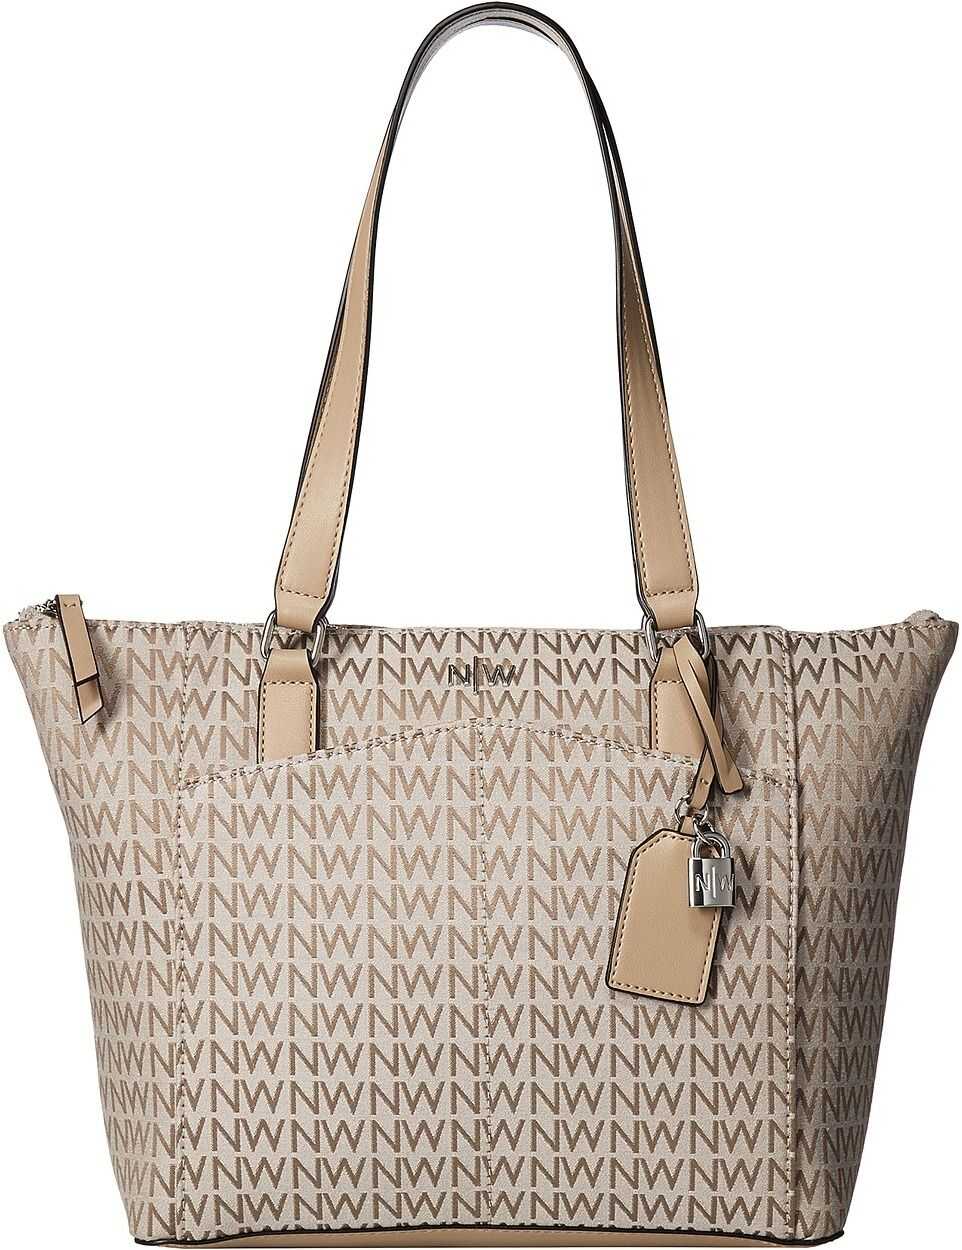 Nine West Atwell Tote Nude/Nude